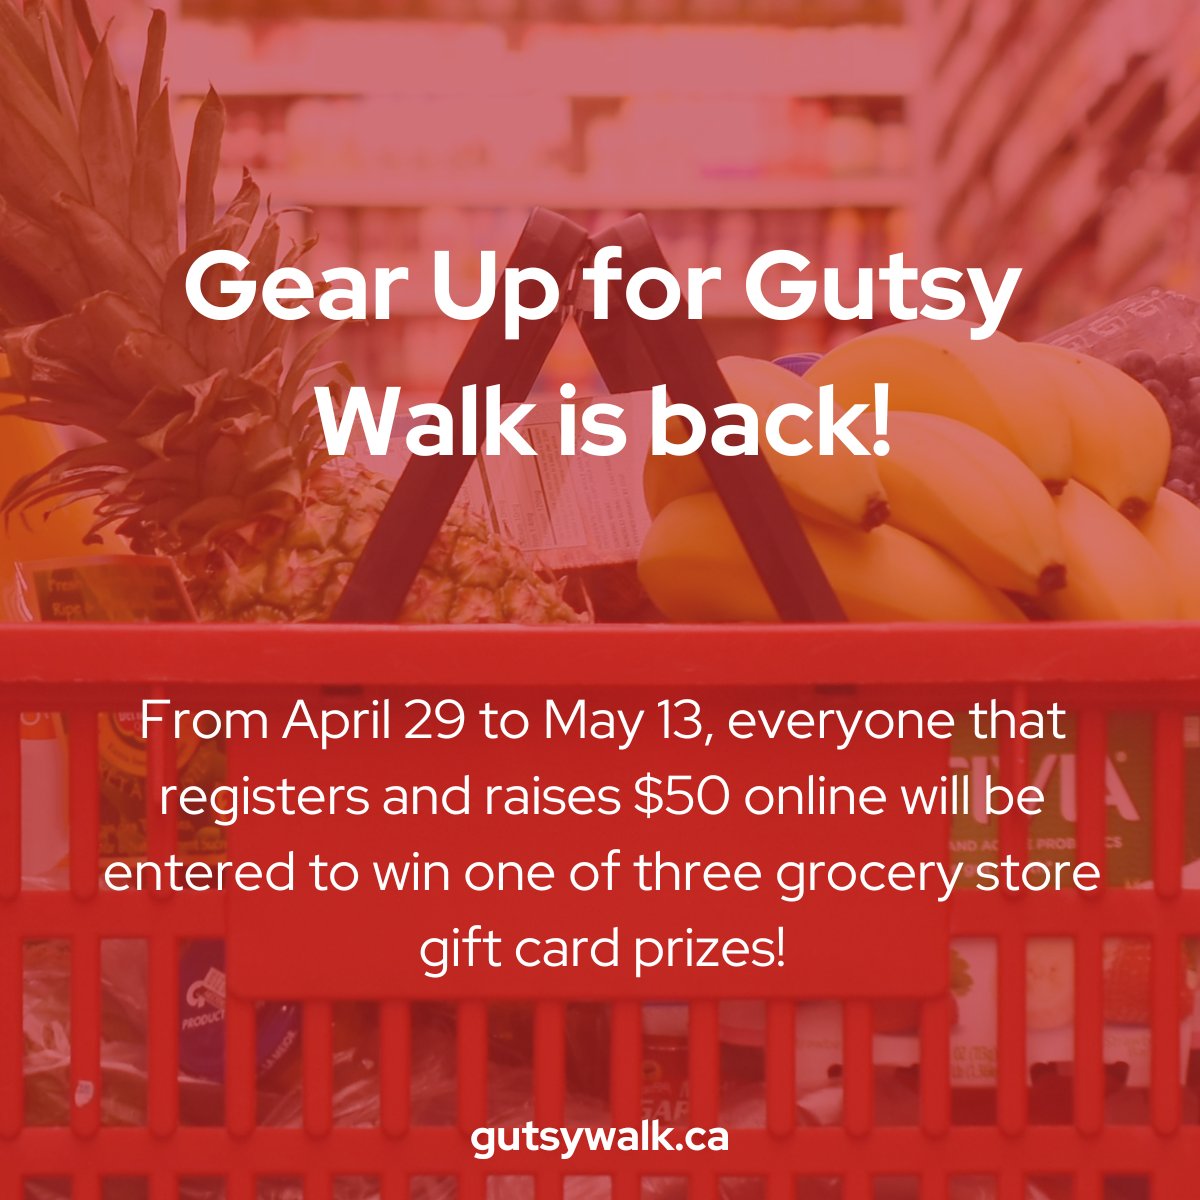 Gear Up for Gutsy Walk is back! From April 29 to May 13, everyone that registers and raises $50 online will be entered to win one of three grocery store gift card prizes! As a bonus: every $50 you raise will earn you an additional entry! Sign up today: gutsywalk.ca